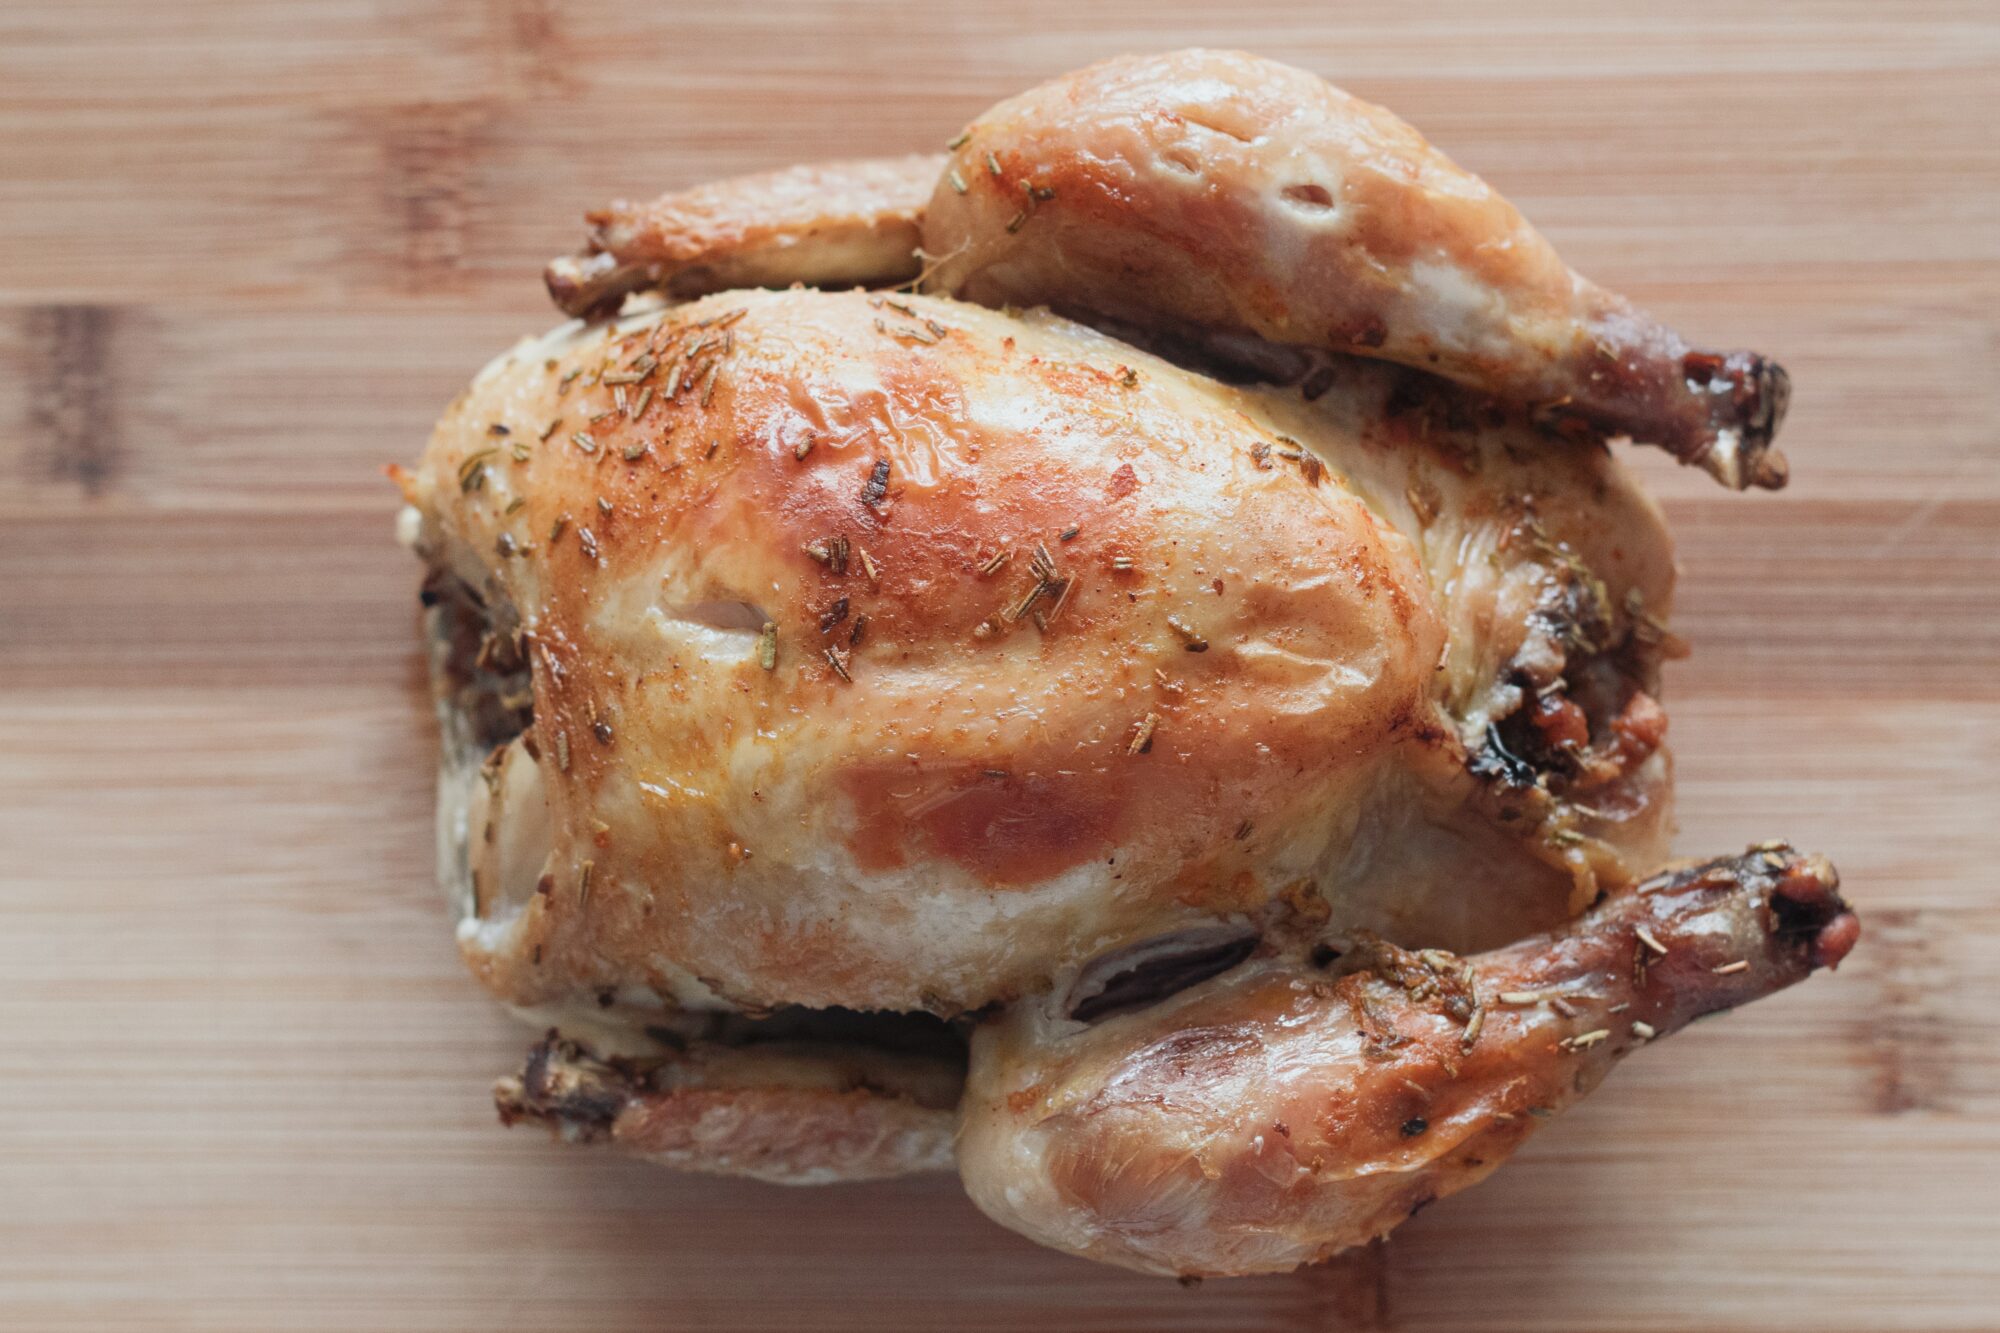 Lean meats like poultry can be part of the PSMF diet